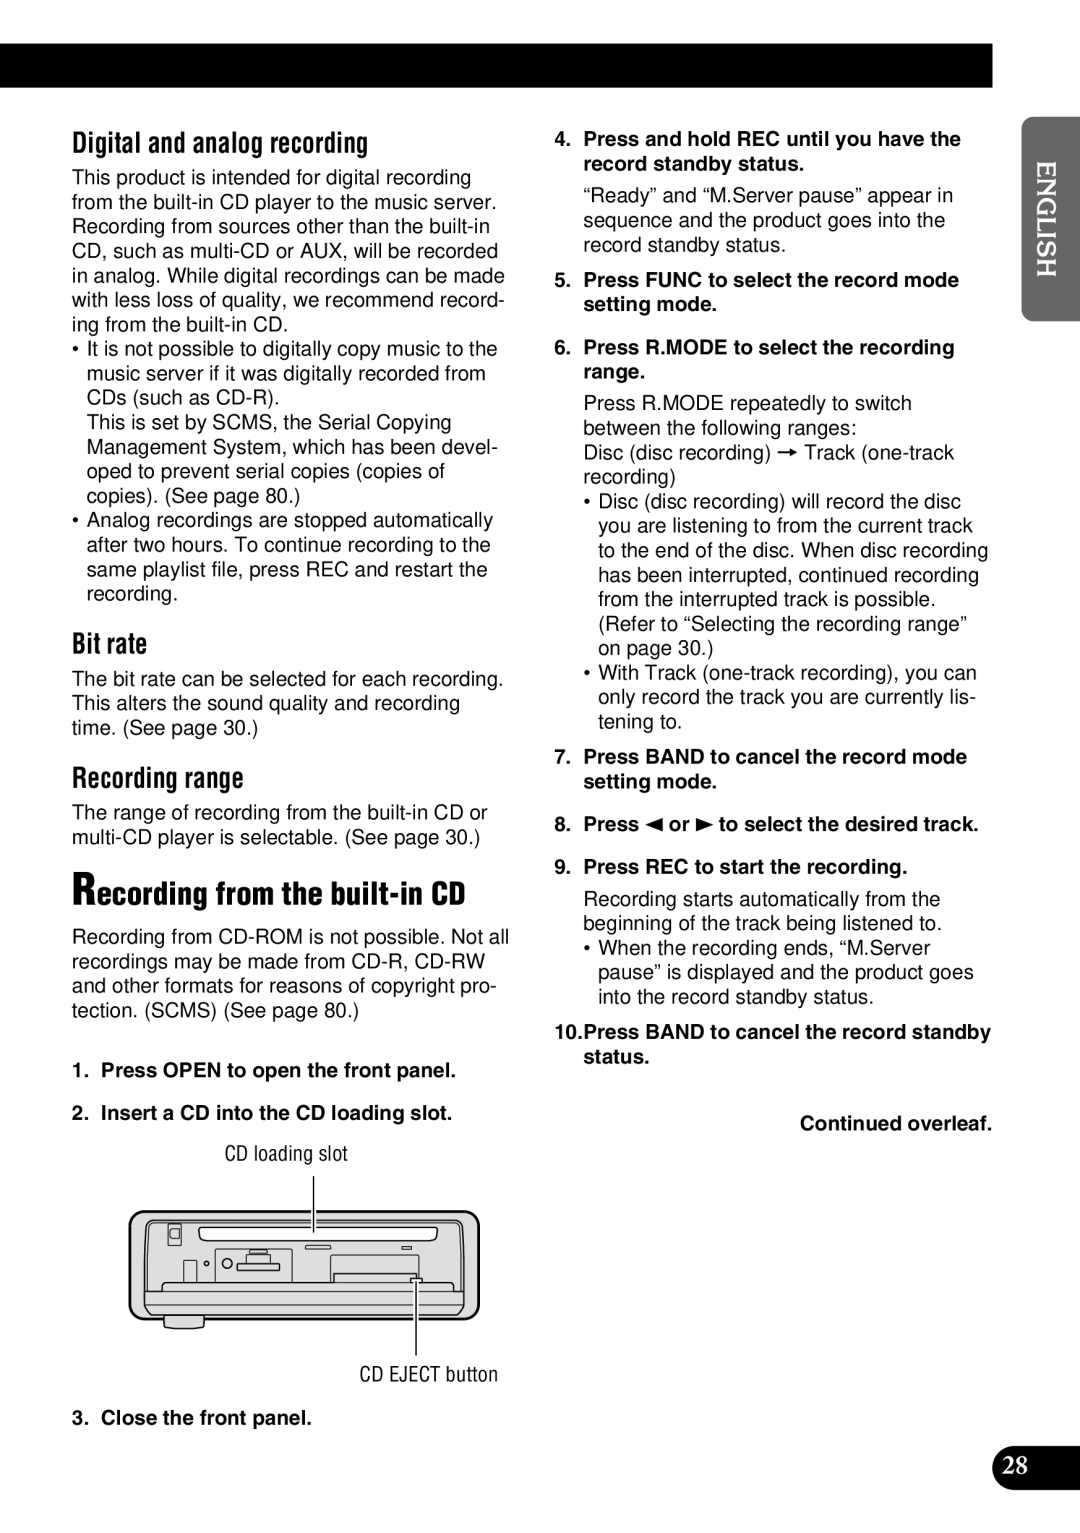 Pioneer DEH-P9100R operation manual Recording from the built-in CD, Digital and analog recording, Bit rate, Recording range 